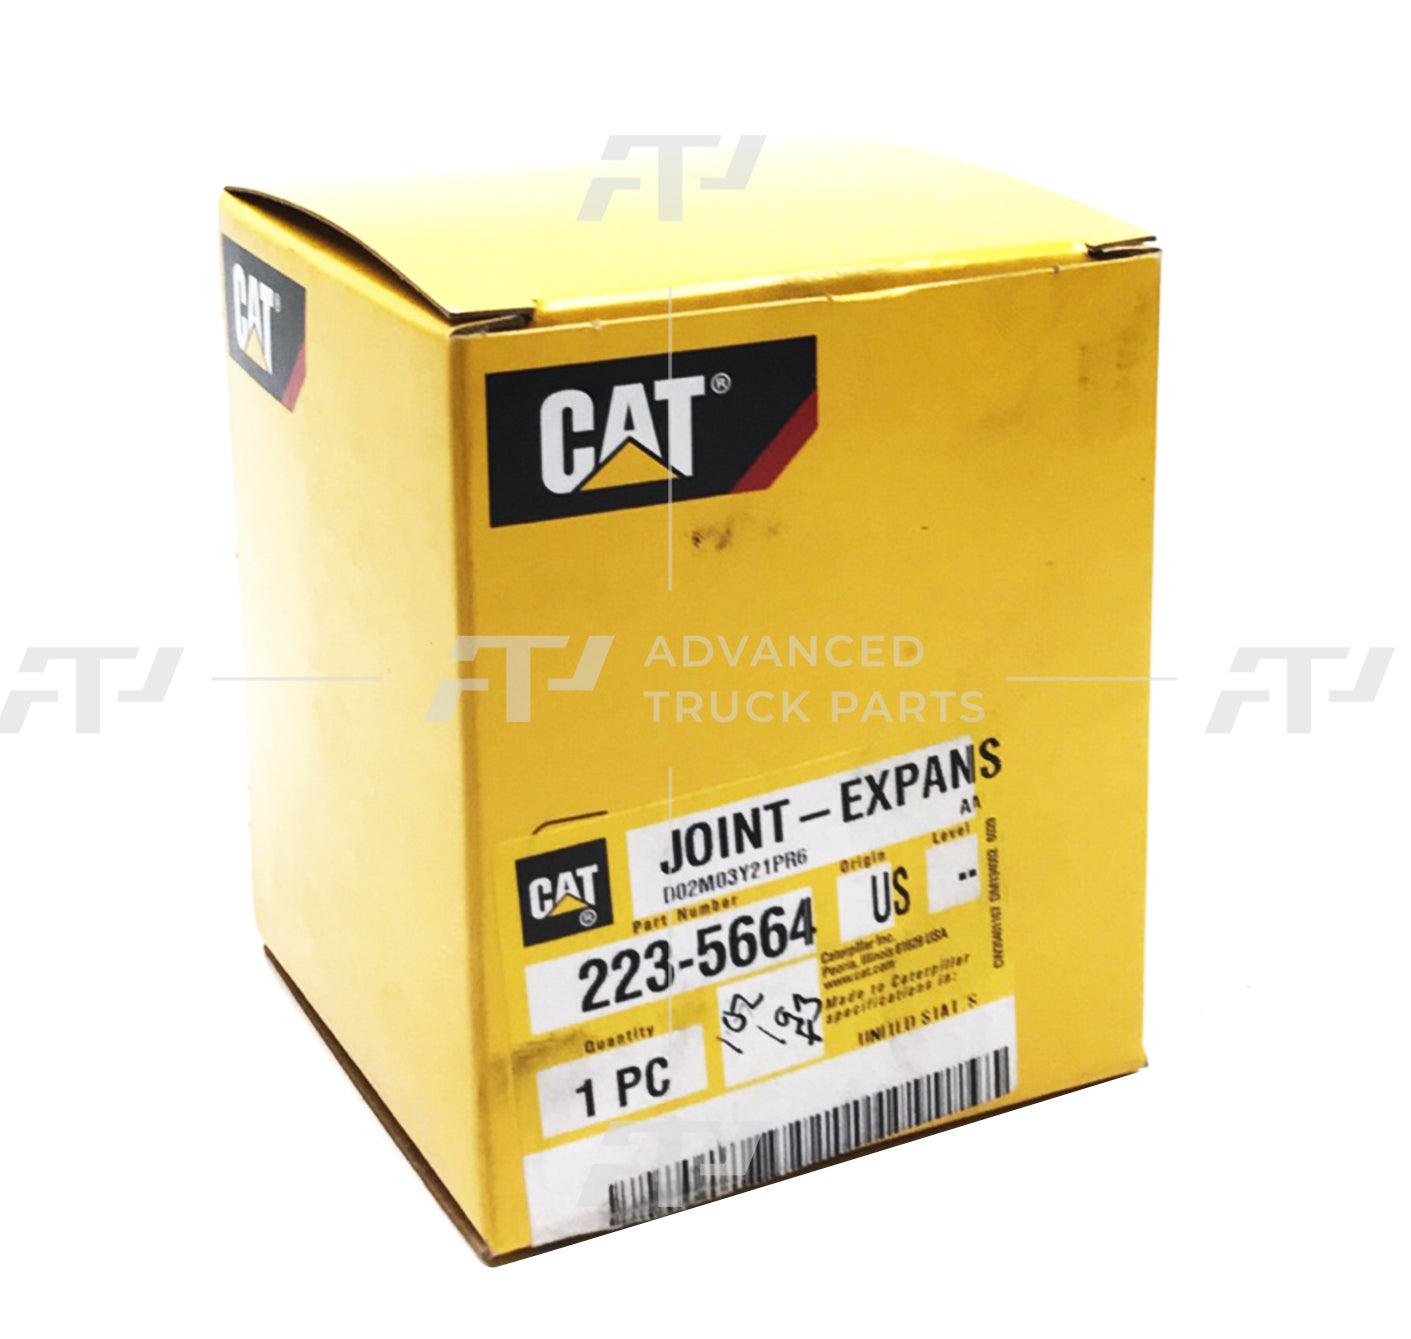 2235664 Genuine Cat Bellow Expansion Joint For C11 - ADVANCED TRUCK PARTS